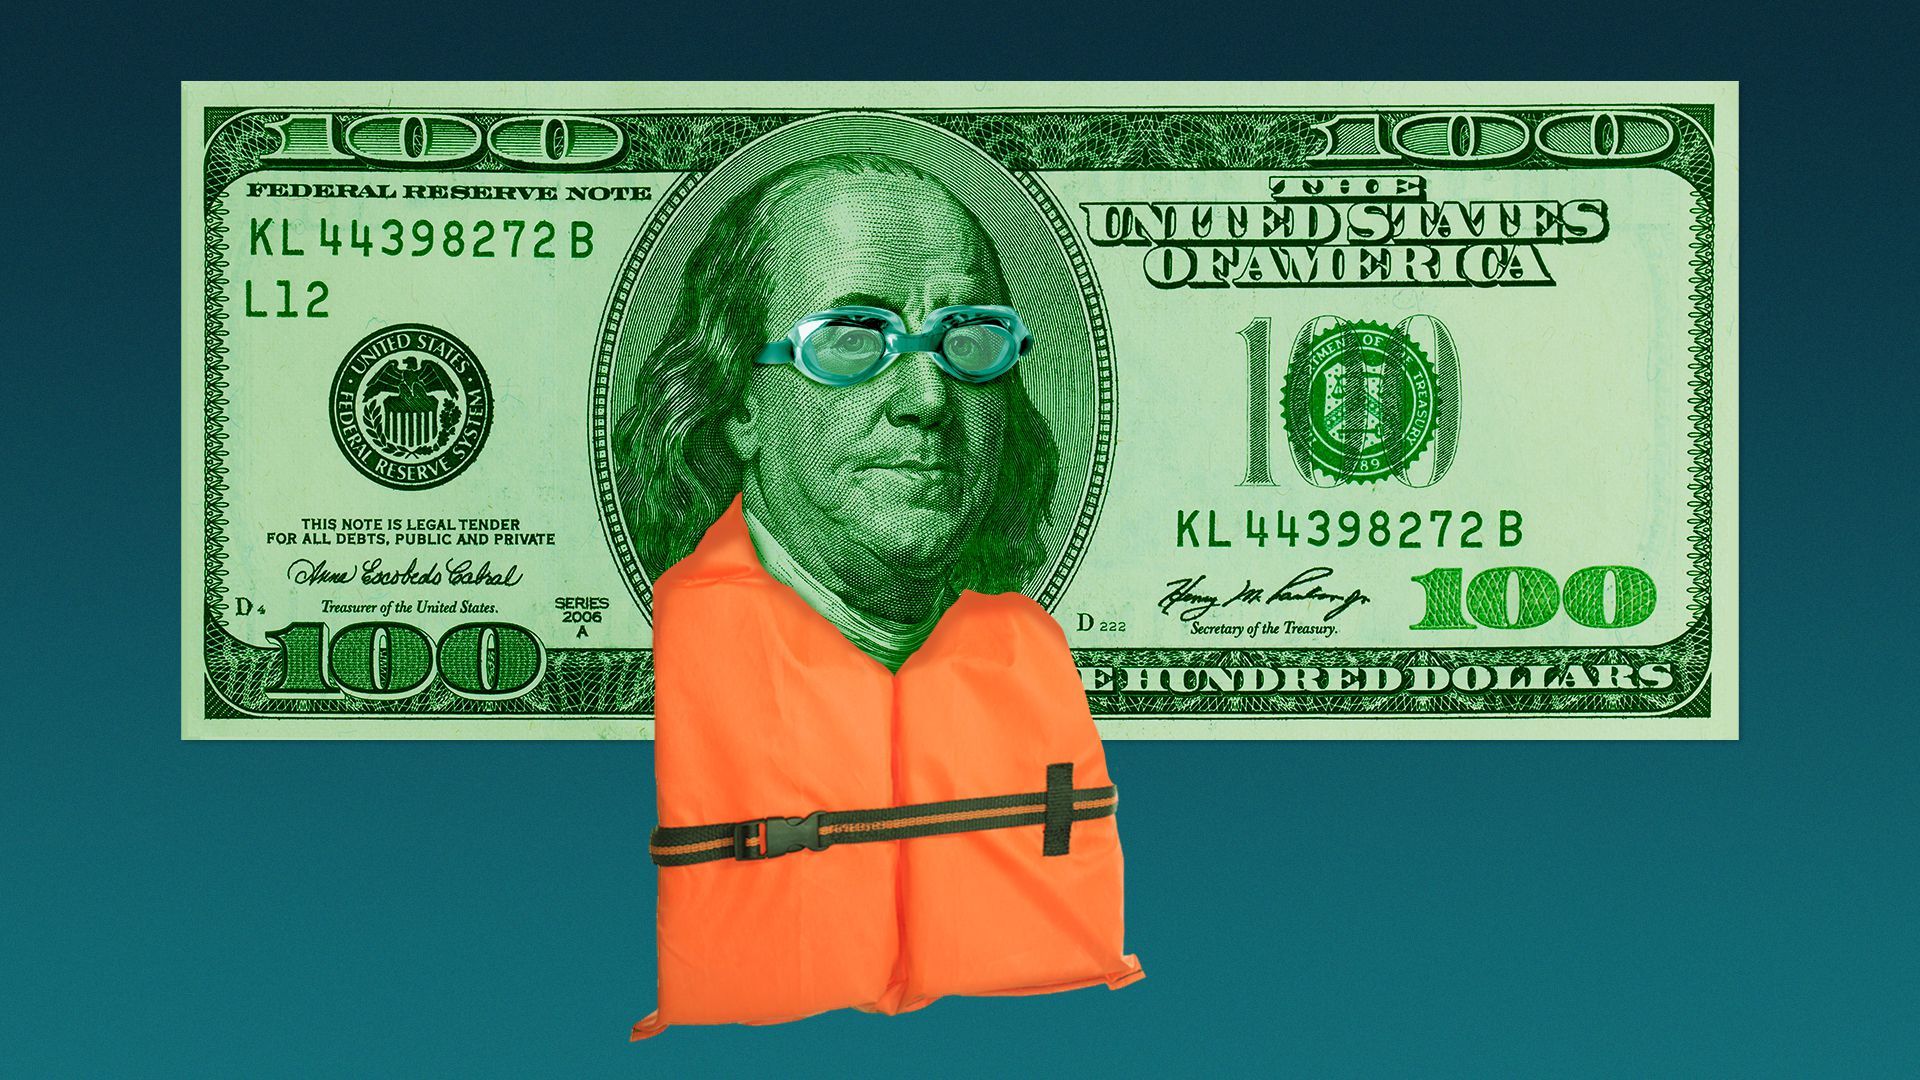  Illustration of Ben Franklin wearing a life jacket and goggles